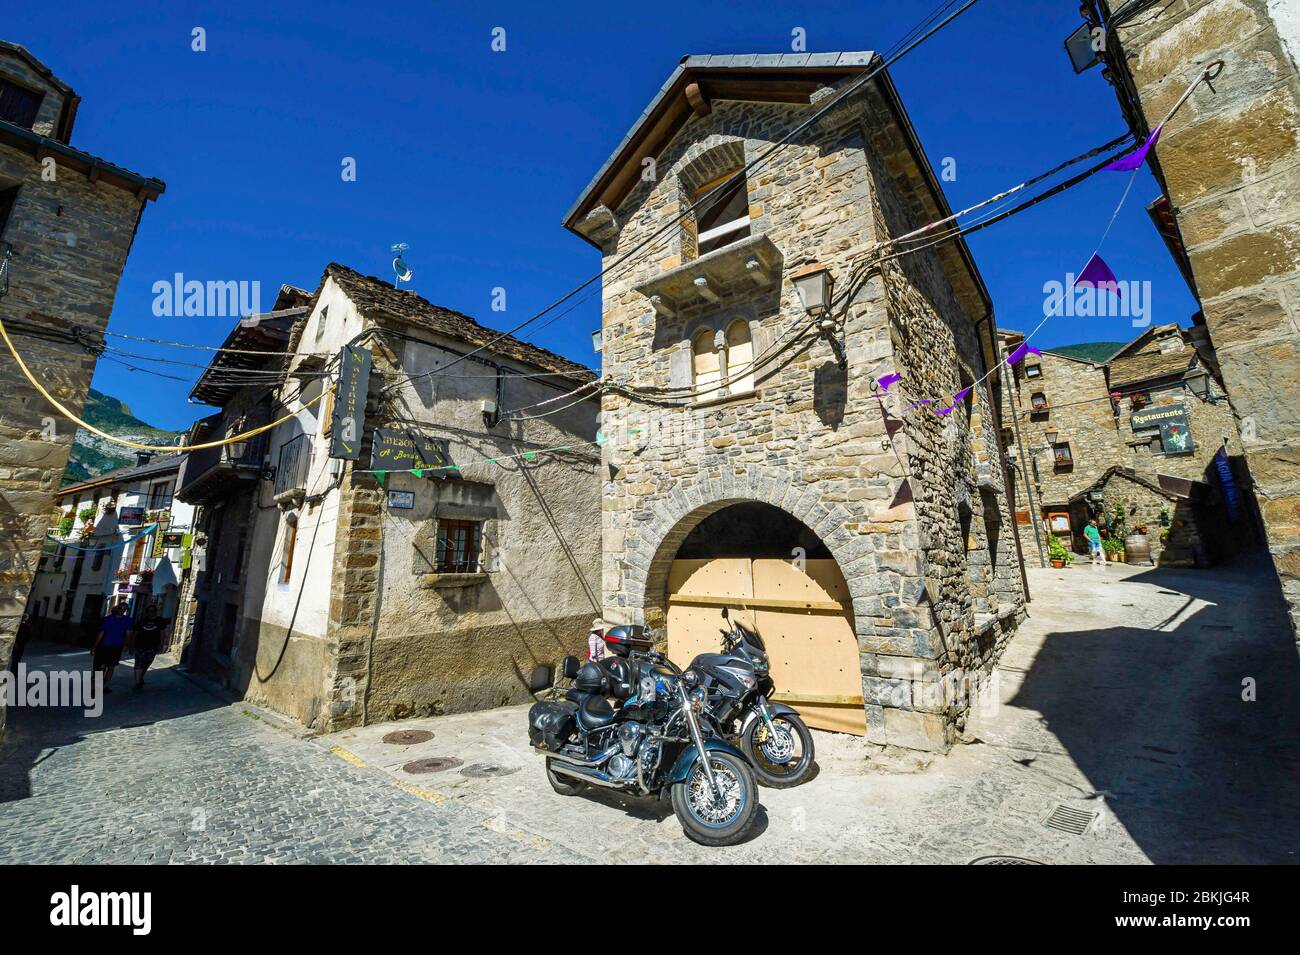 Spain, Aragon, comarque of Sobrarbe, province of Huesca, National Park of Ordesa and Monte Perdido, listed as World Heritage by UNESCO, Torla village Stock Photo